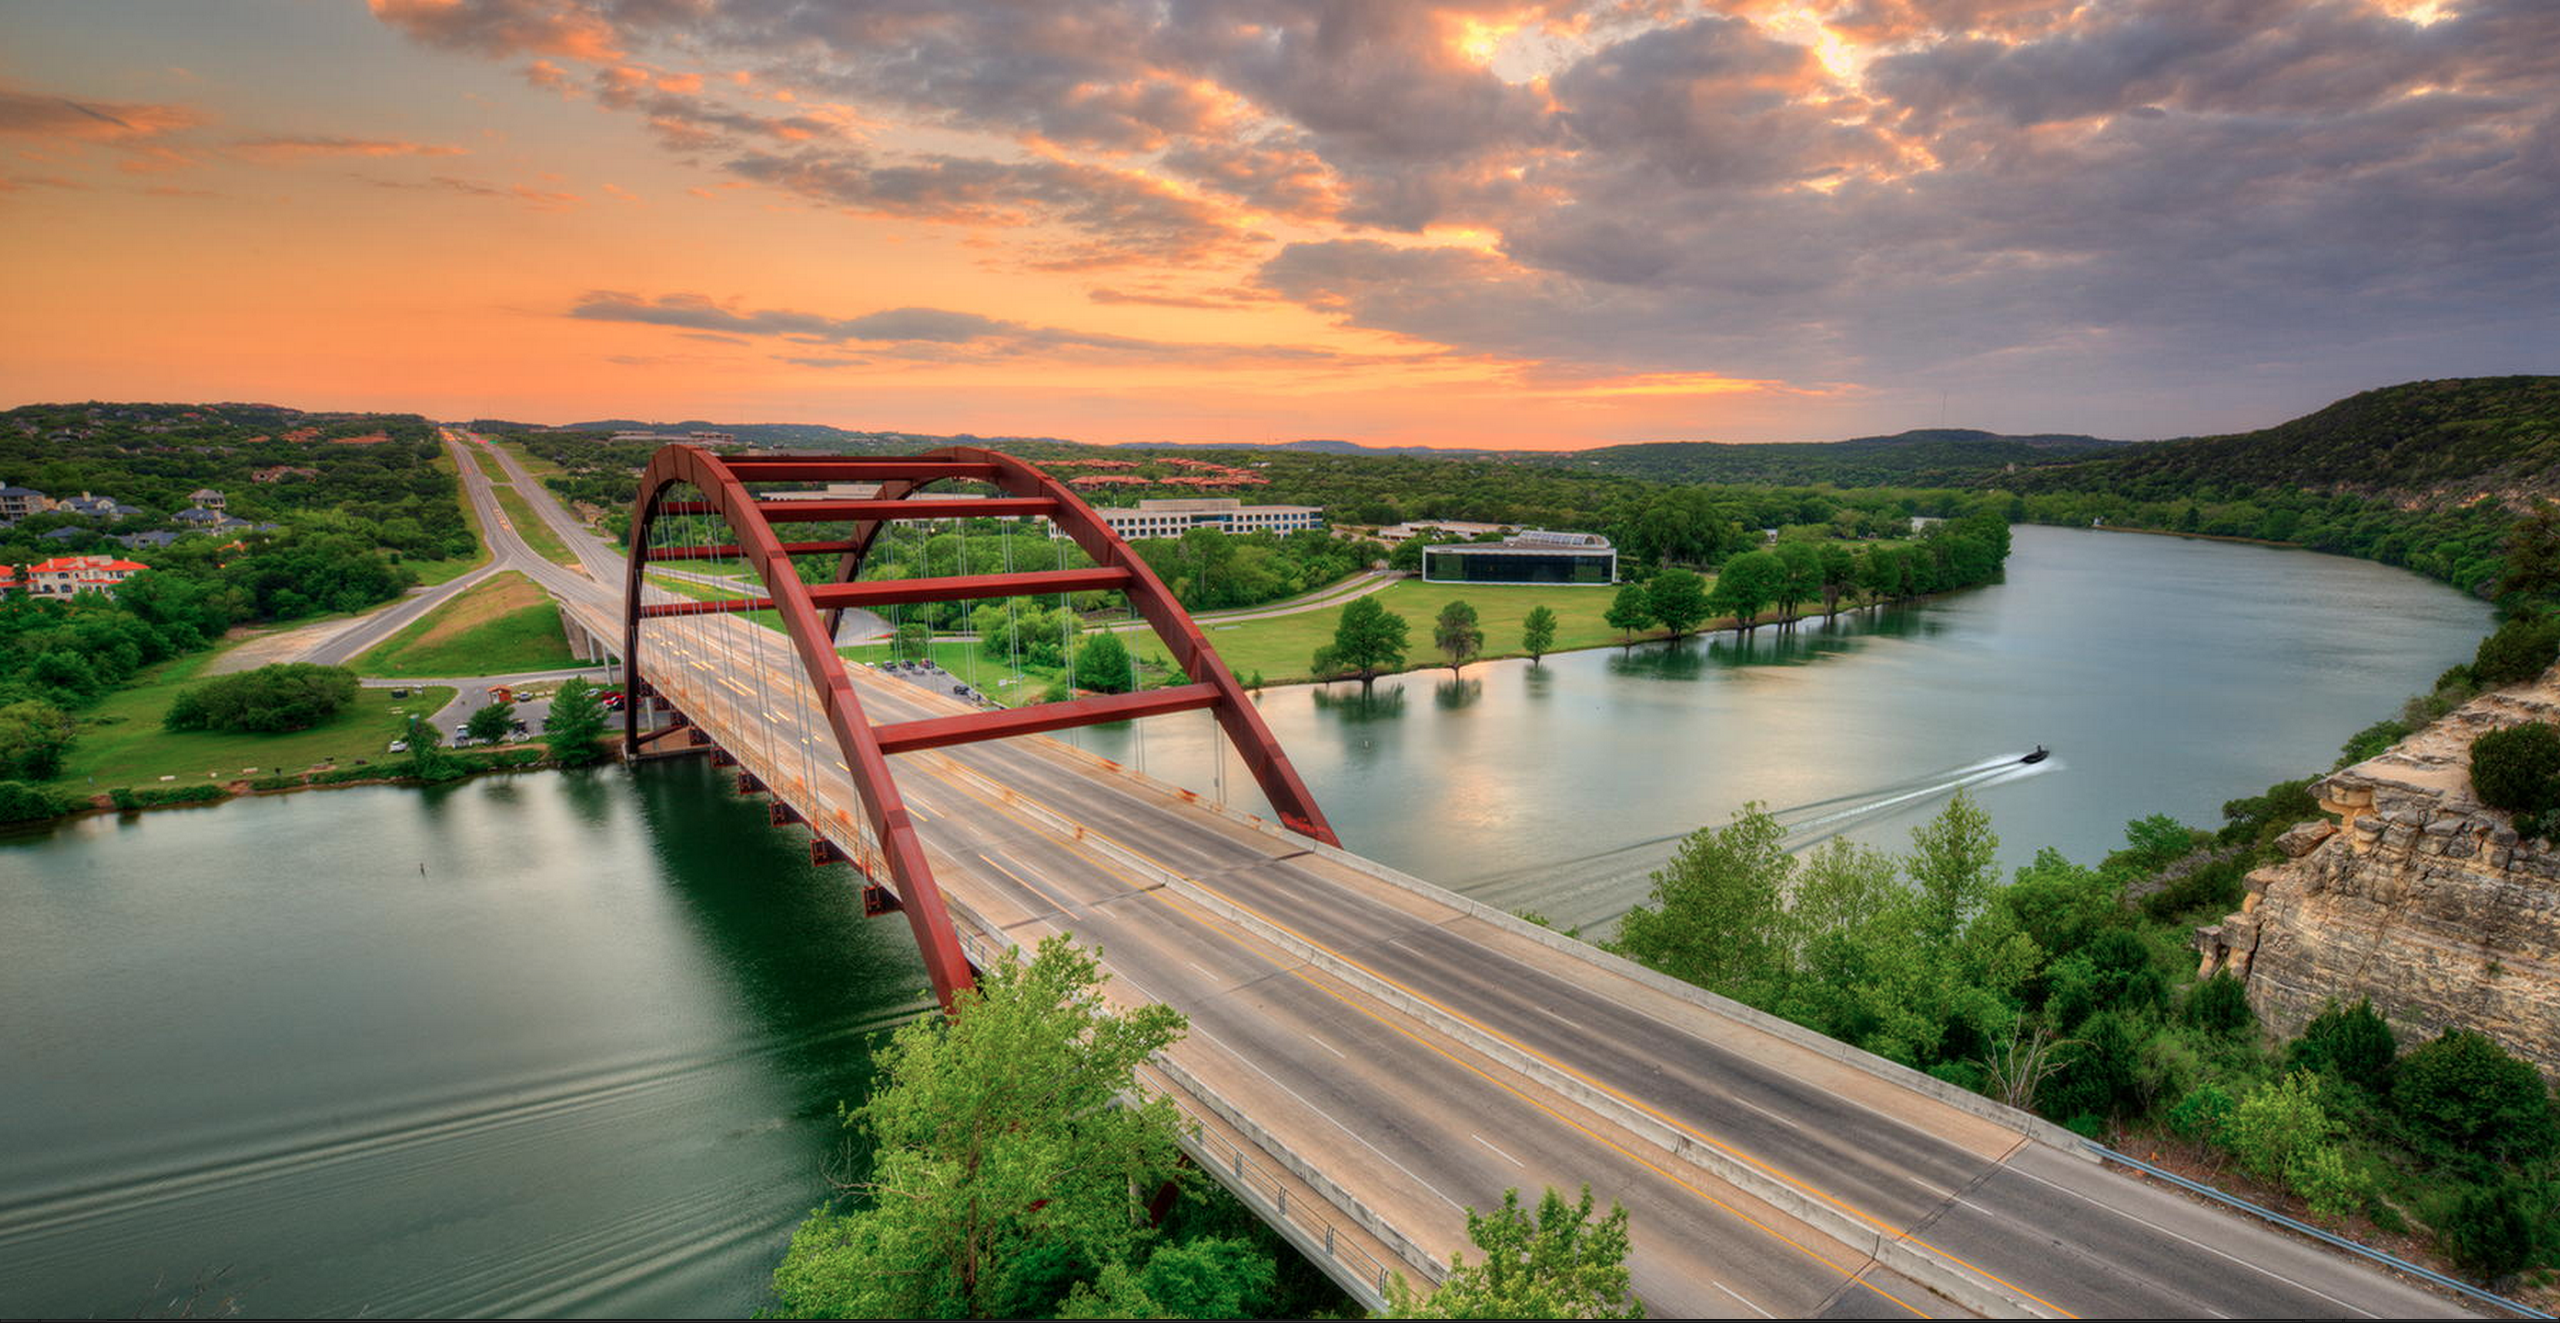 Must-Sees in the Hip City of Austin, Texas.